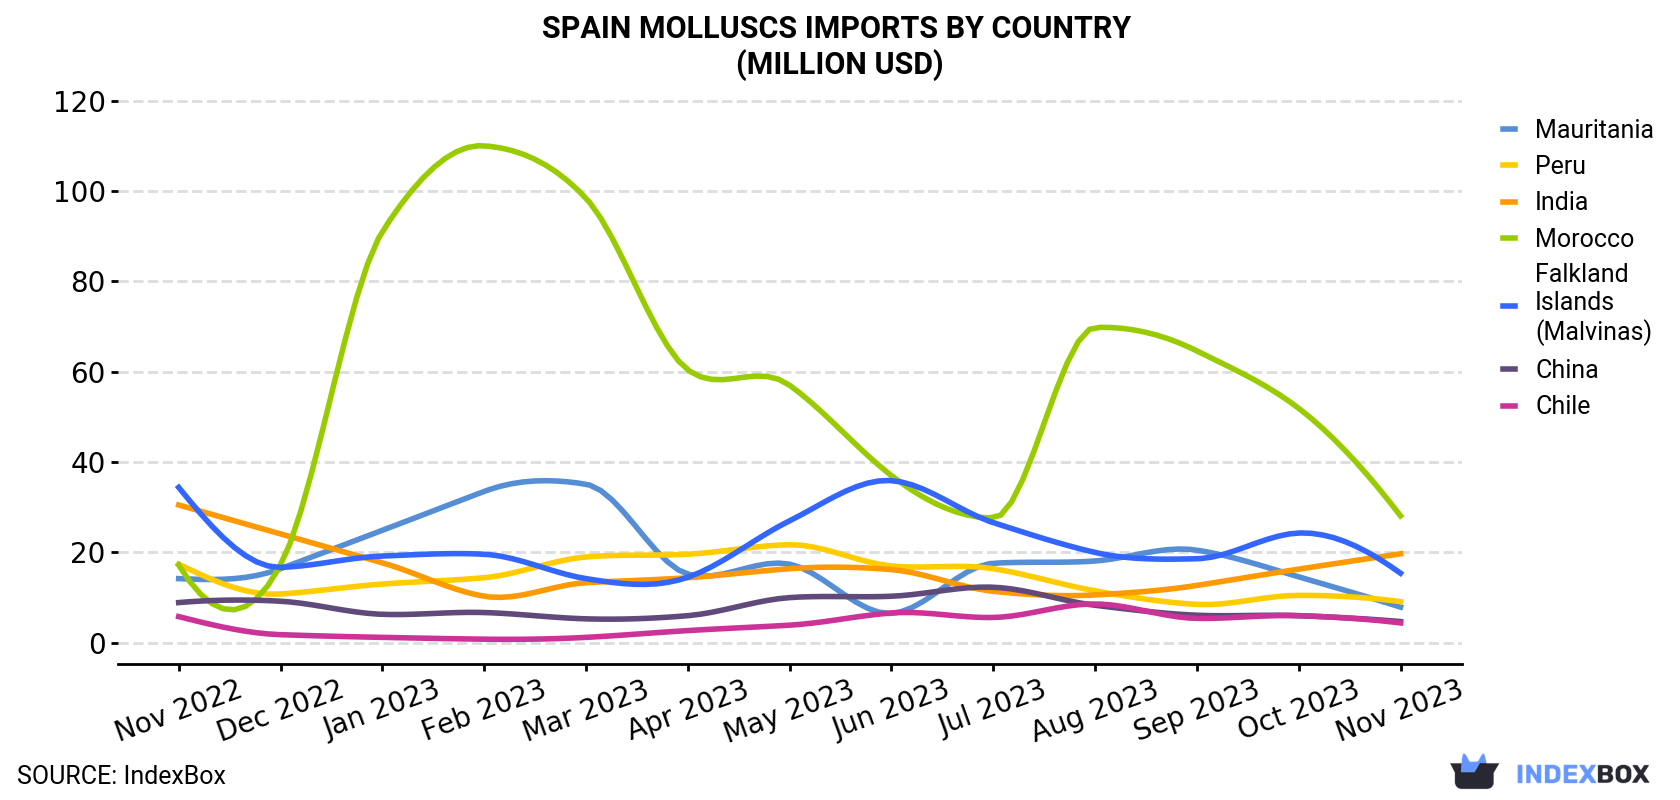 Spain Molluscs Imports By Country (Million USD)